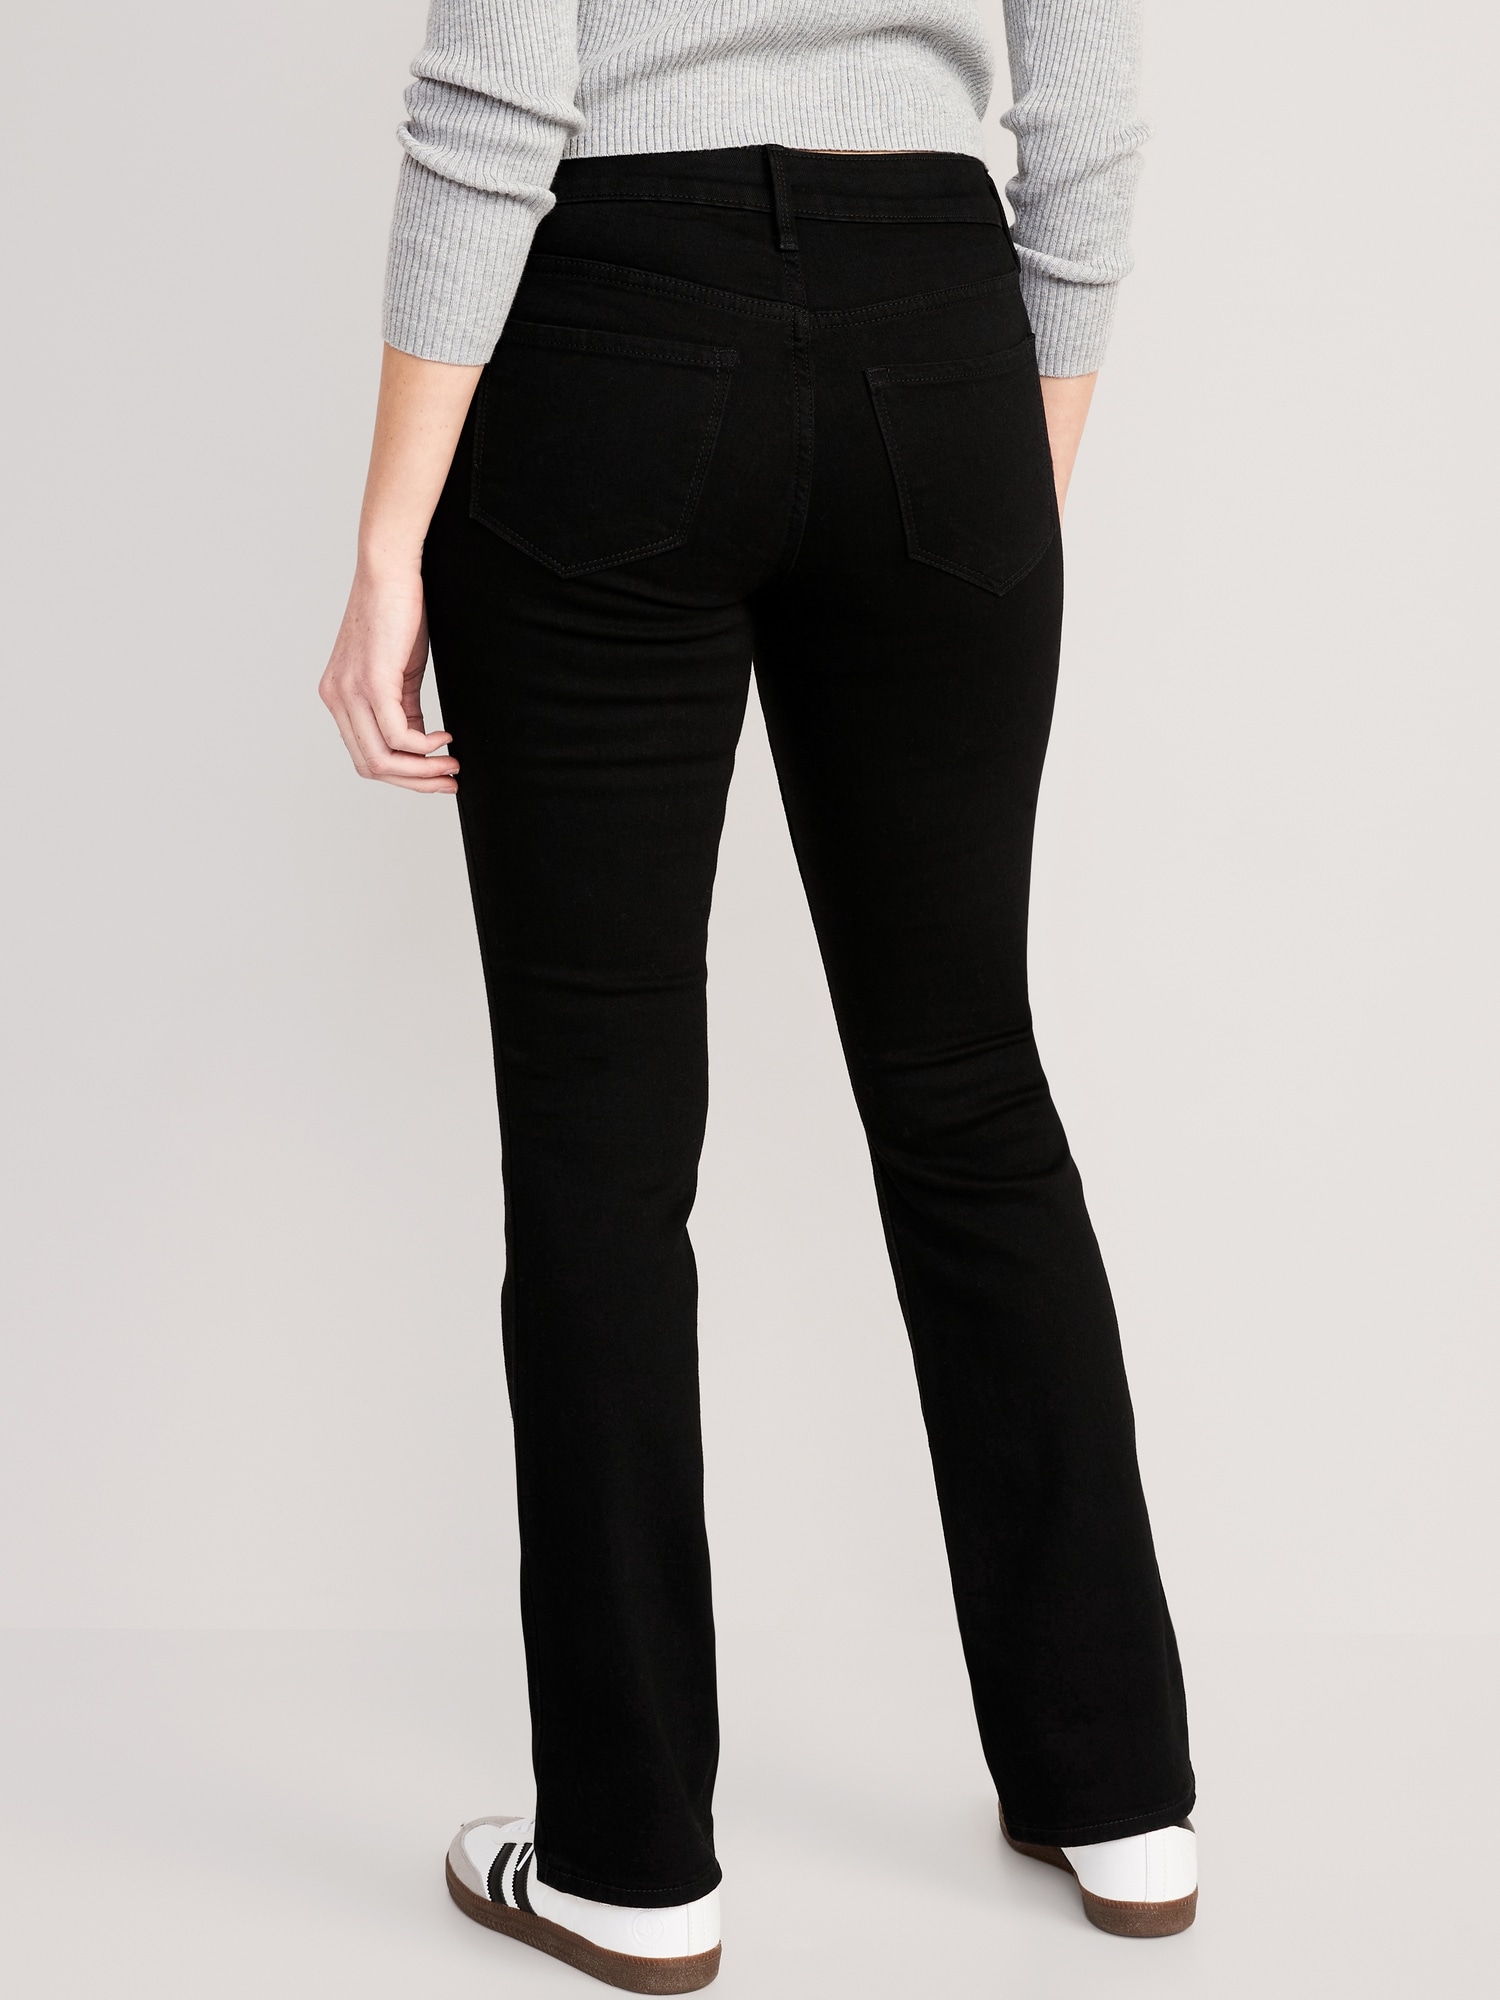 Mid-Rise Kicker Boot-Cut Black Jeans for Women | Old Navy